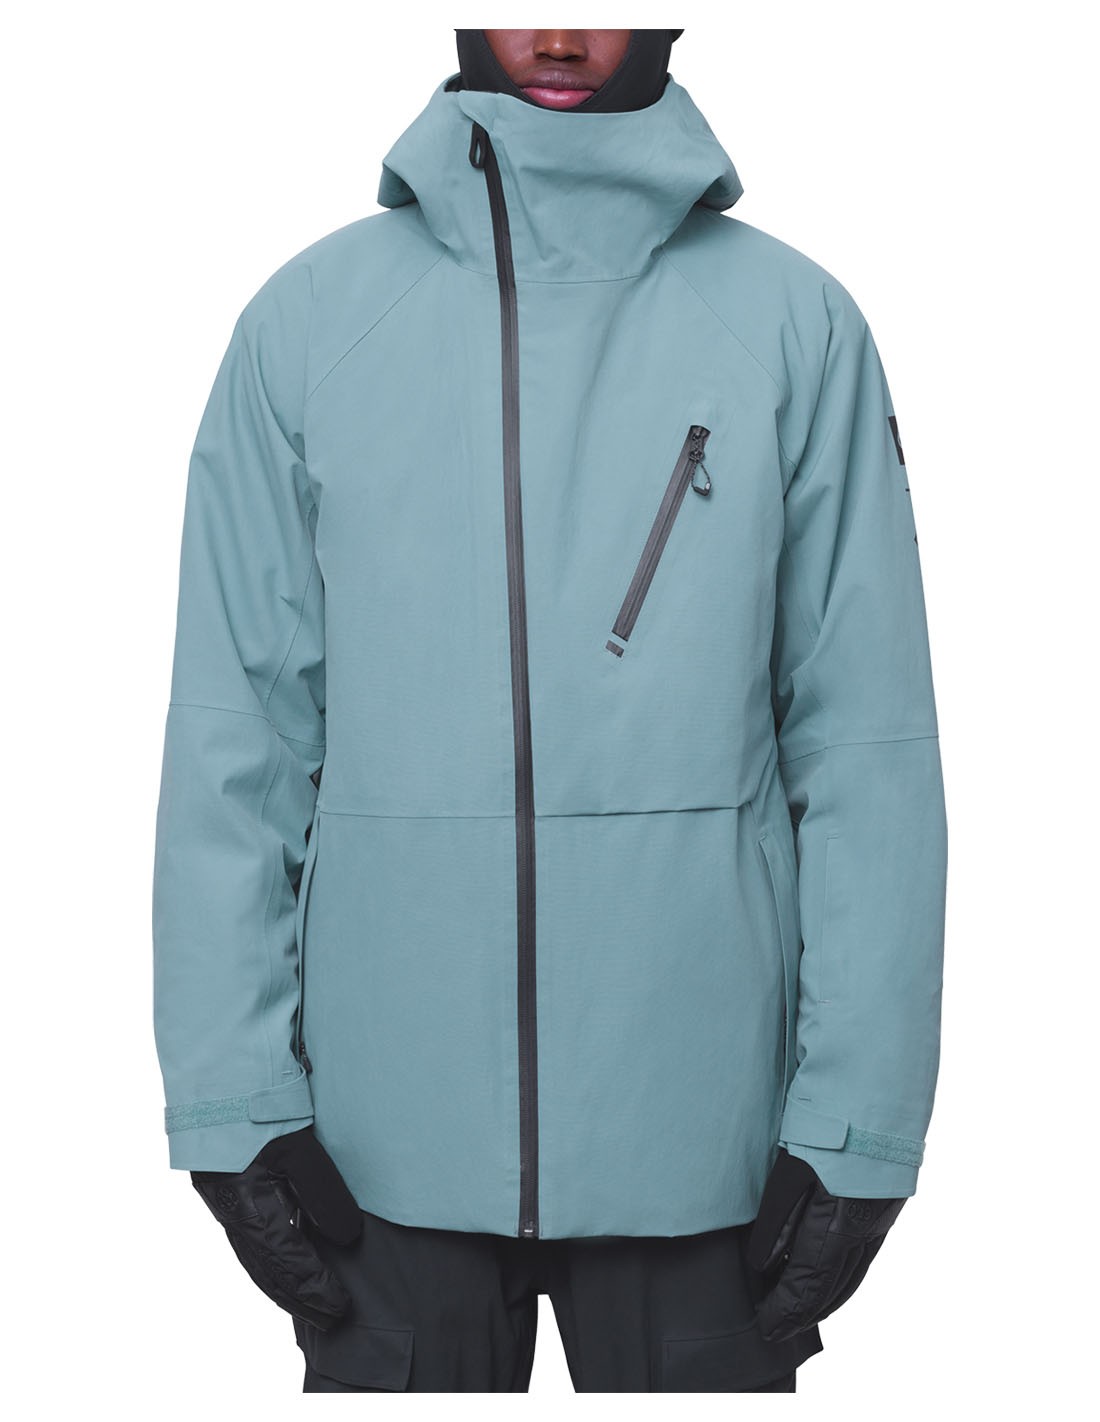 686 Men's GORE-TEX PRO 3L Thermagraph Jacket, 51% OFF